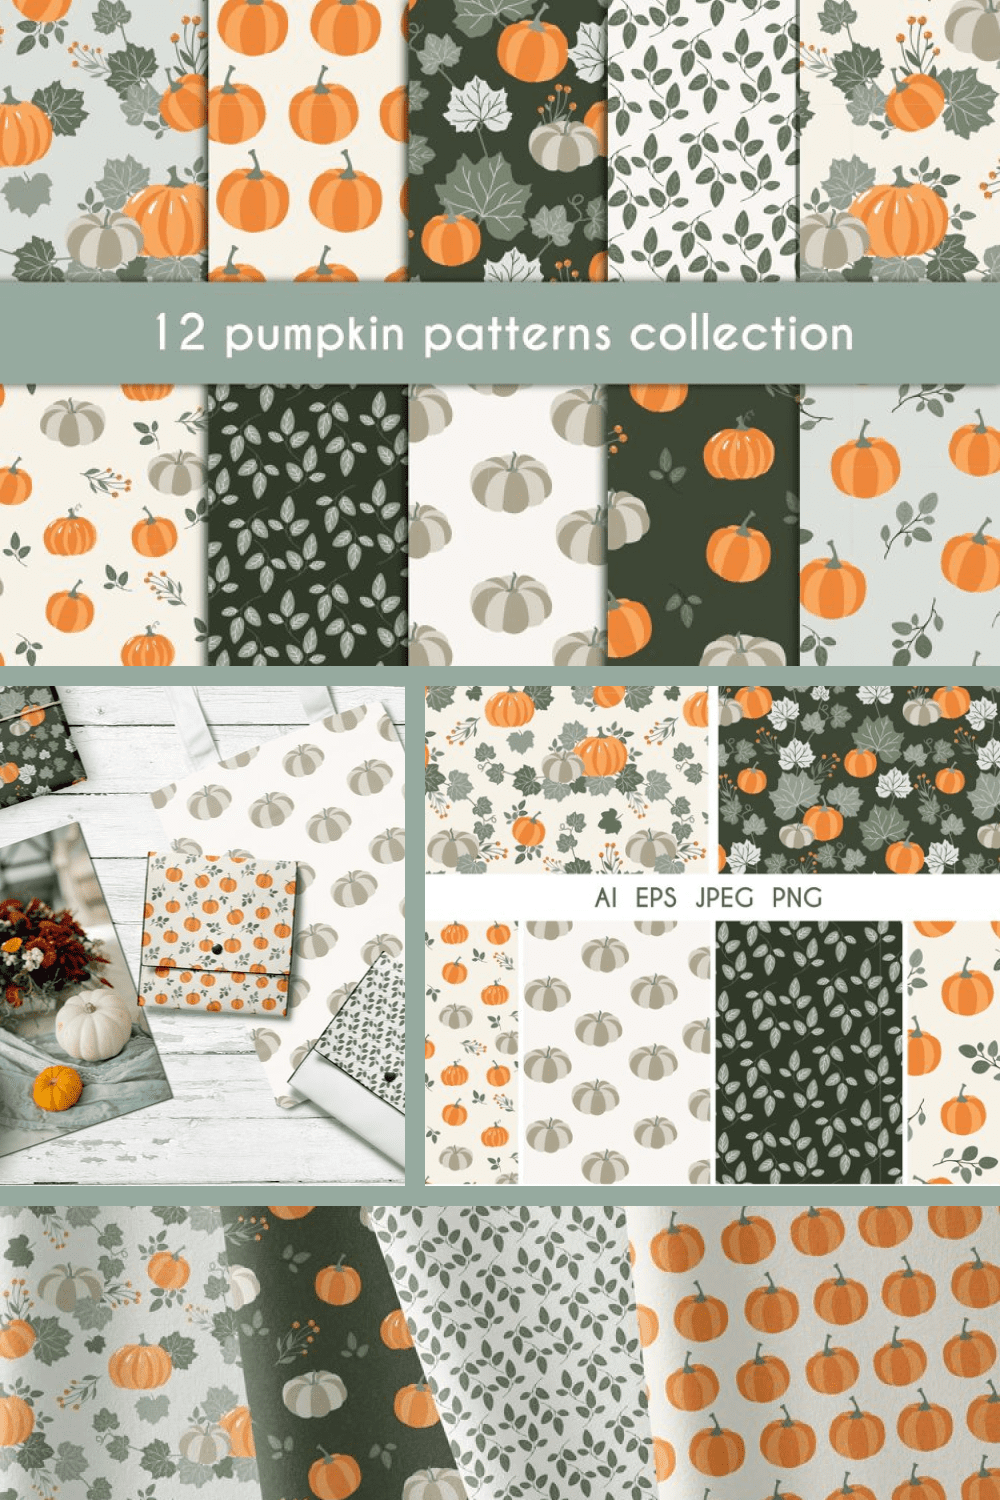 Template with small and varied pumpkins in pleasant warm colors.